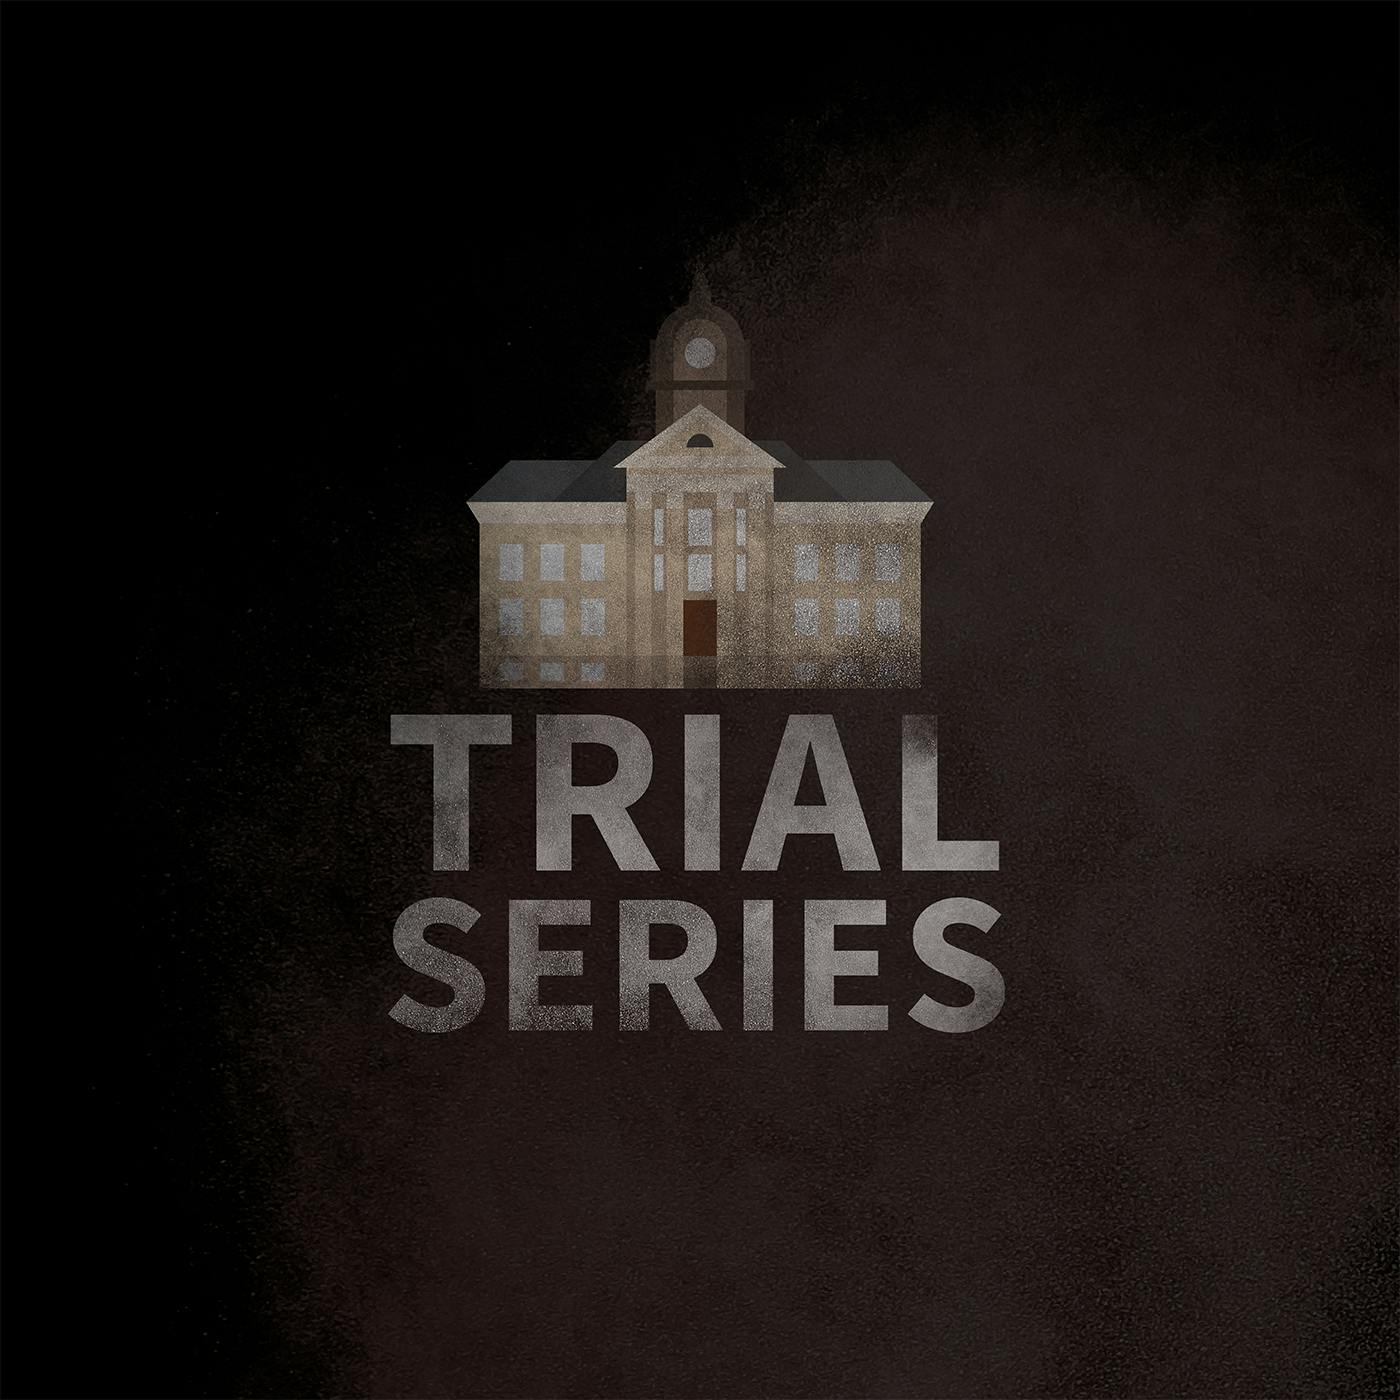 The Trial Series: What's next? by Tenderfoot TV